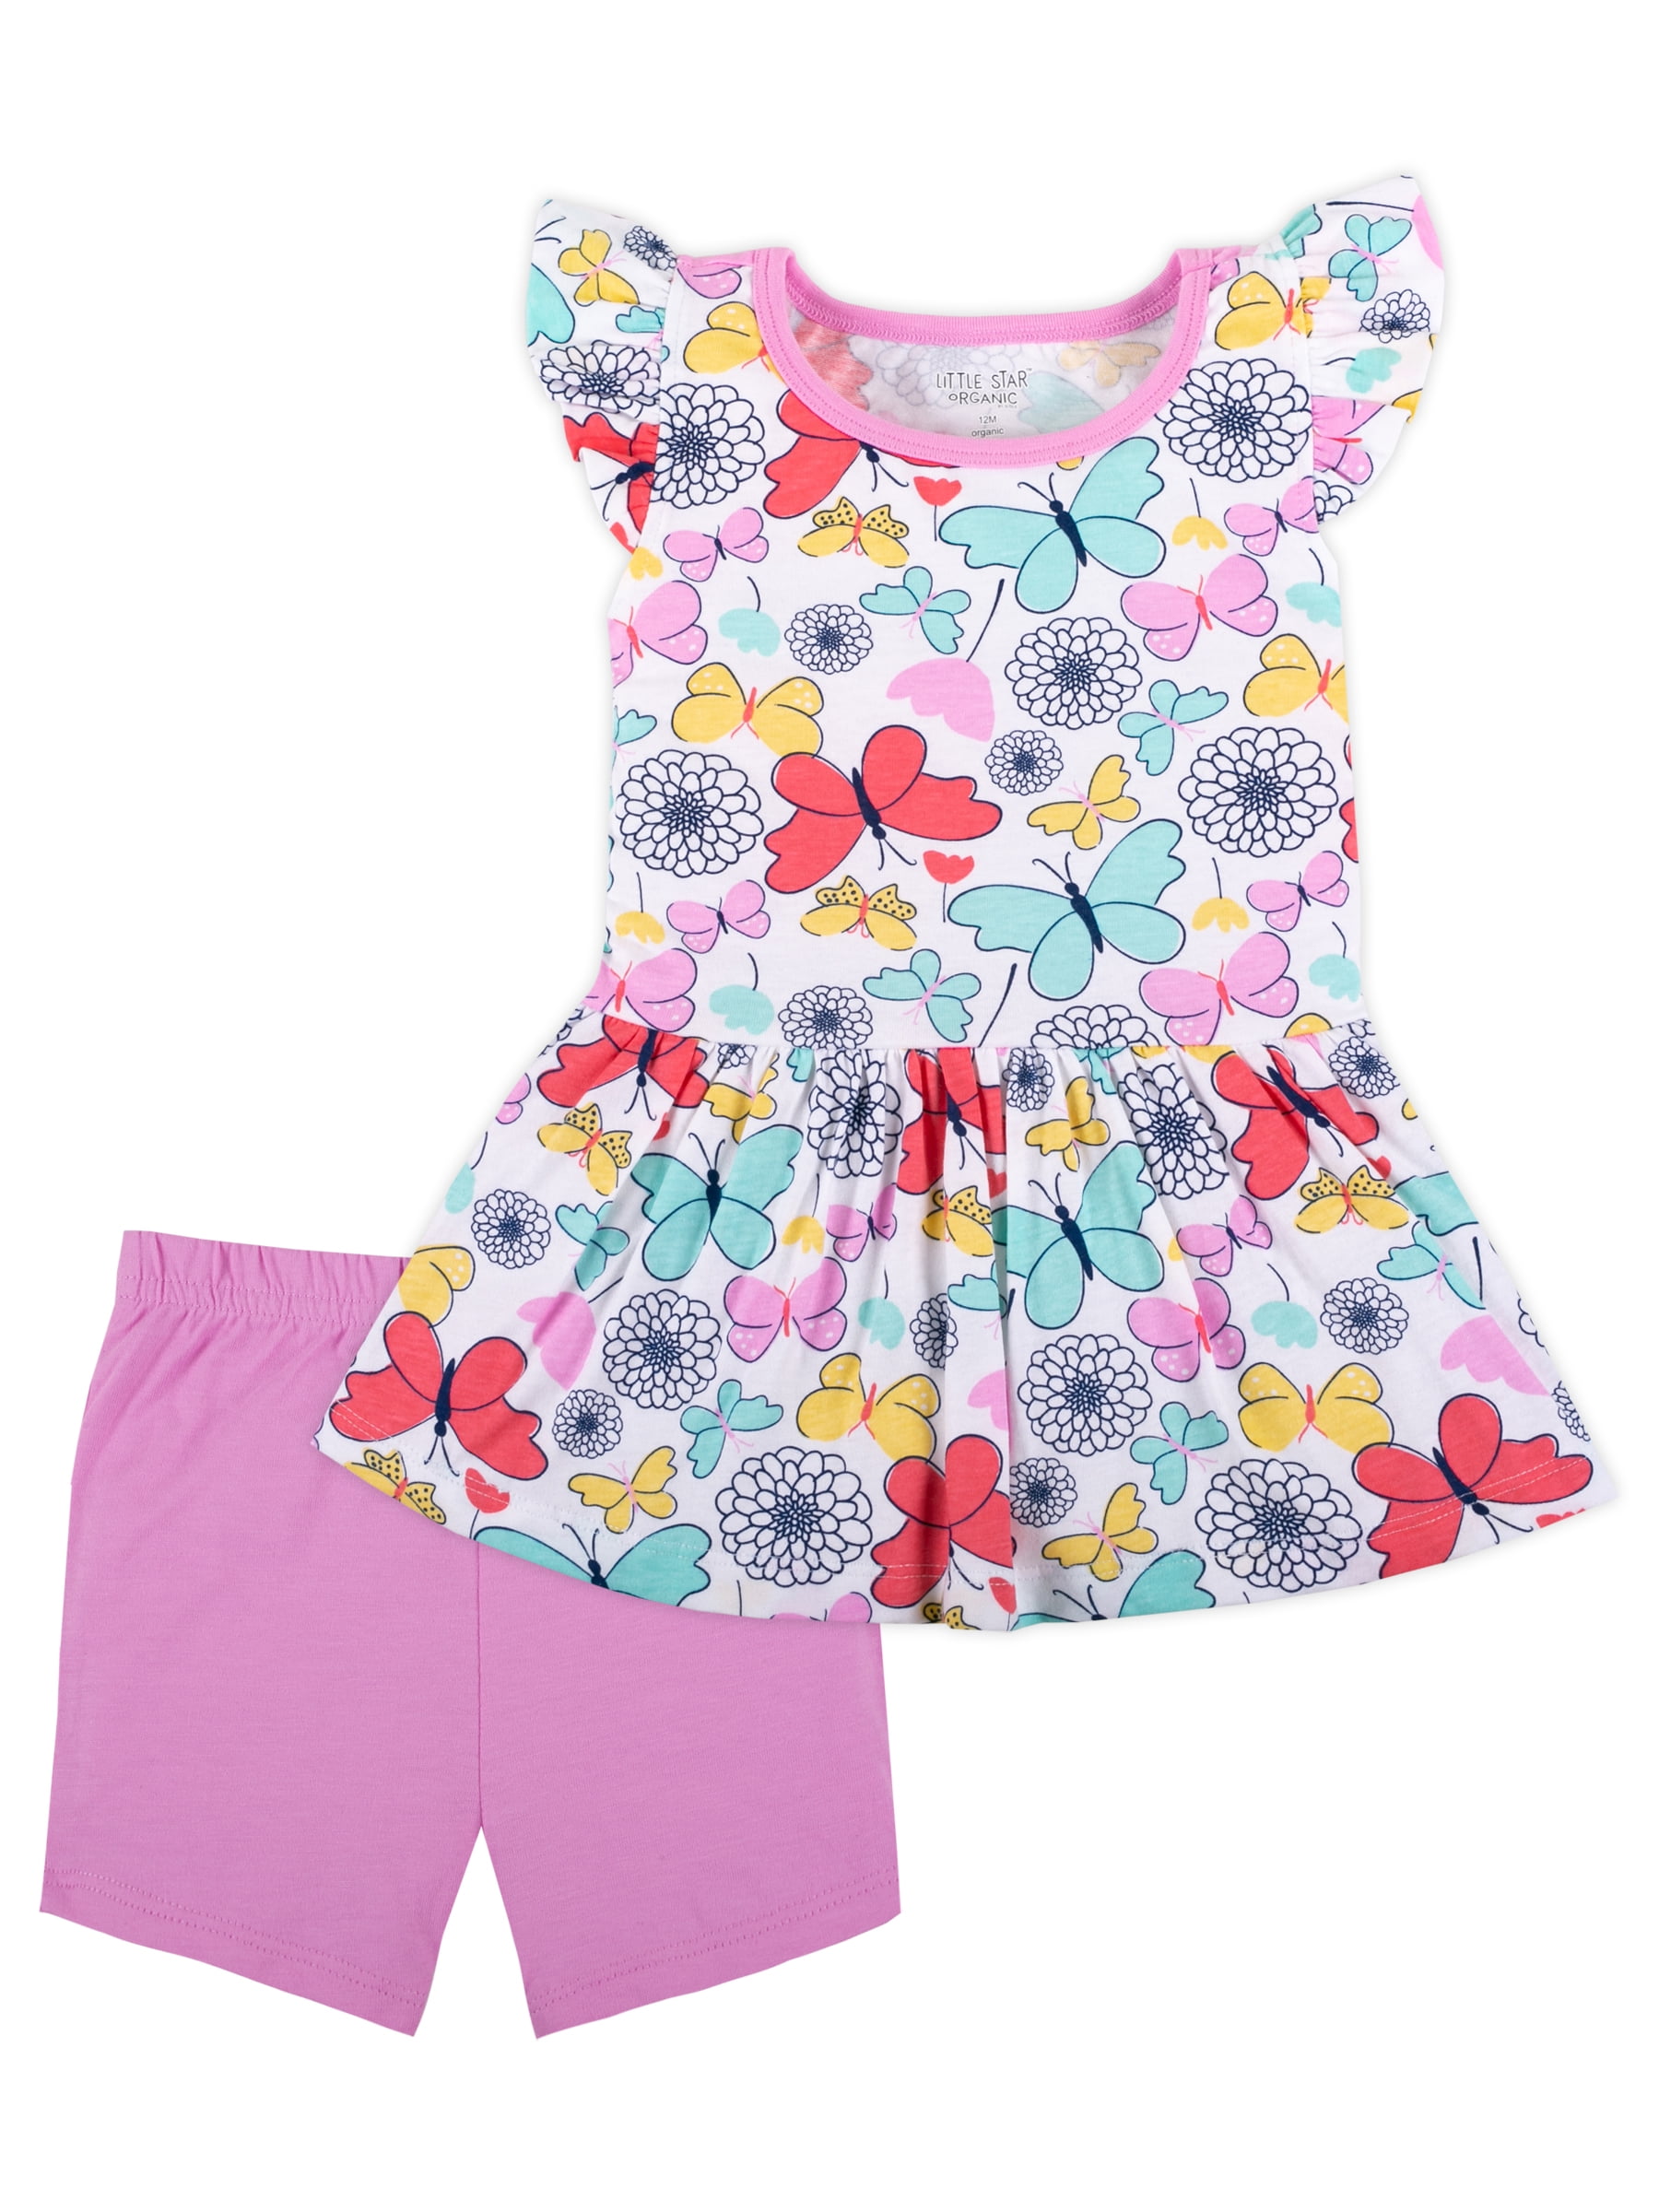 Baby Girls 2 Piece Set Size 6-9 Months Tank Top Shirt Shorts Outfit Blue Pink 